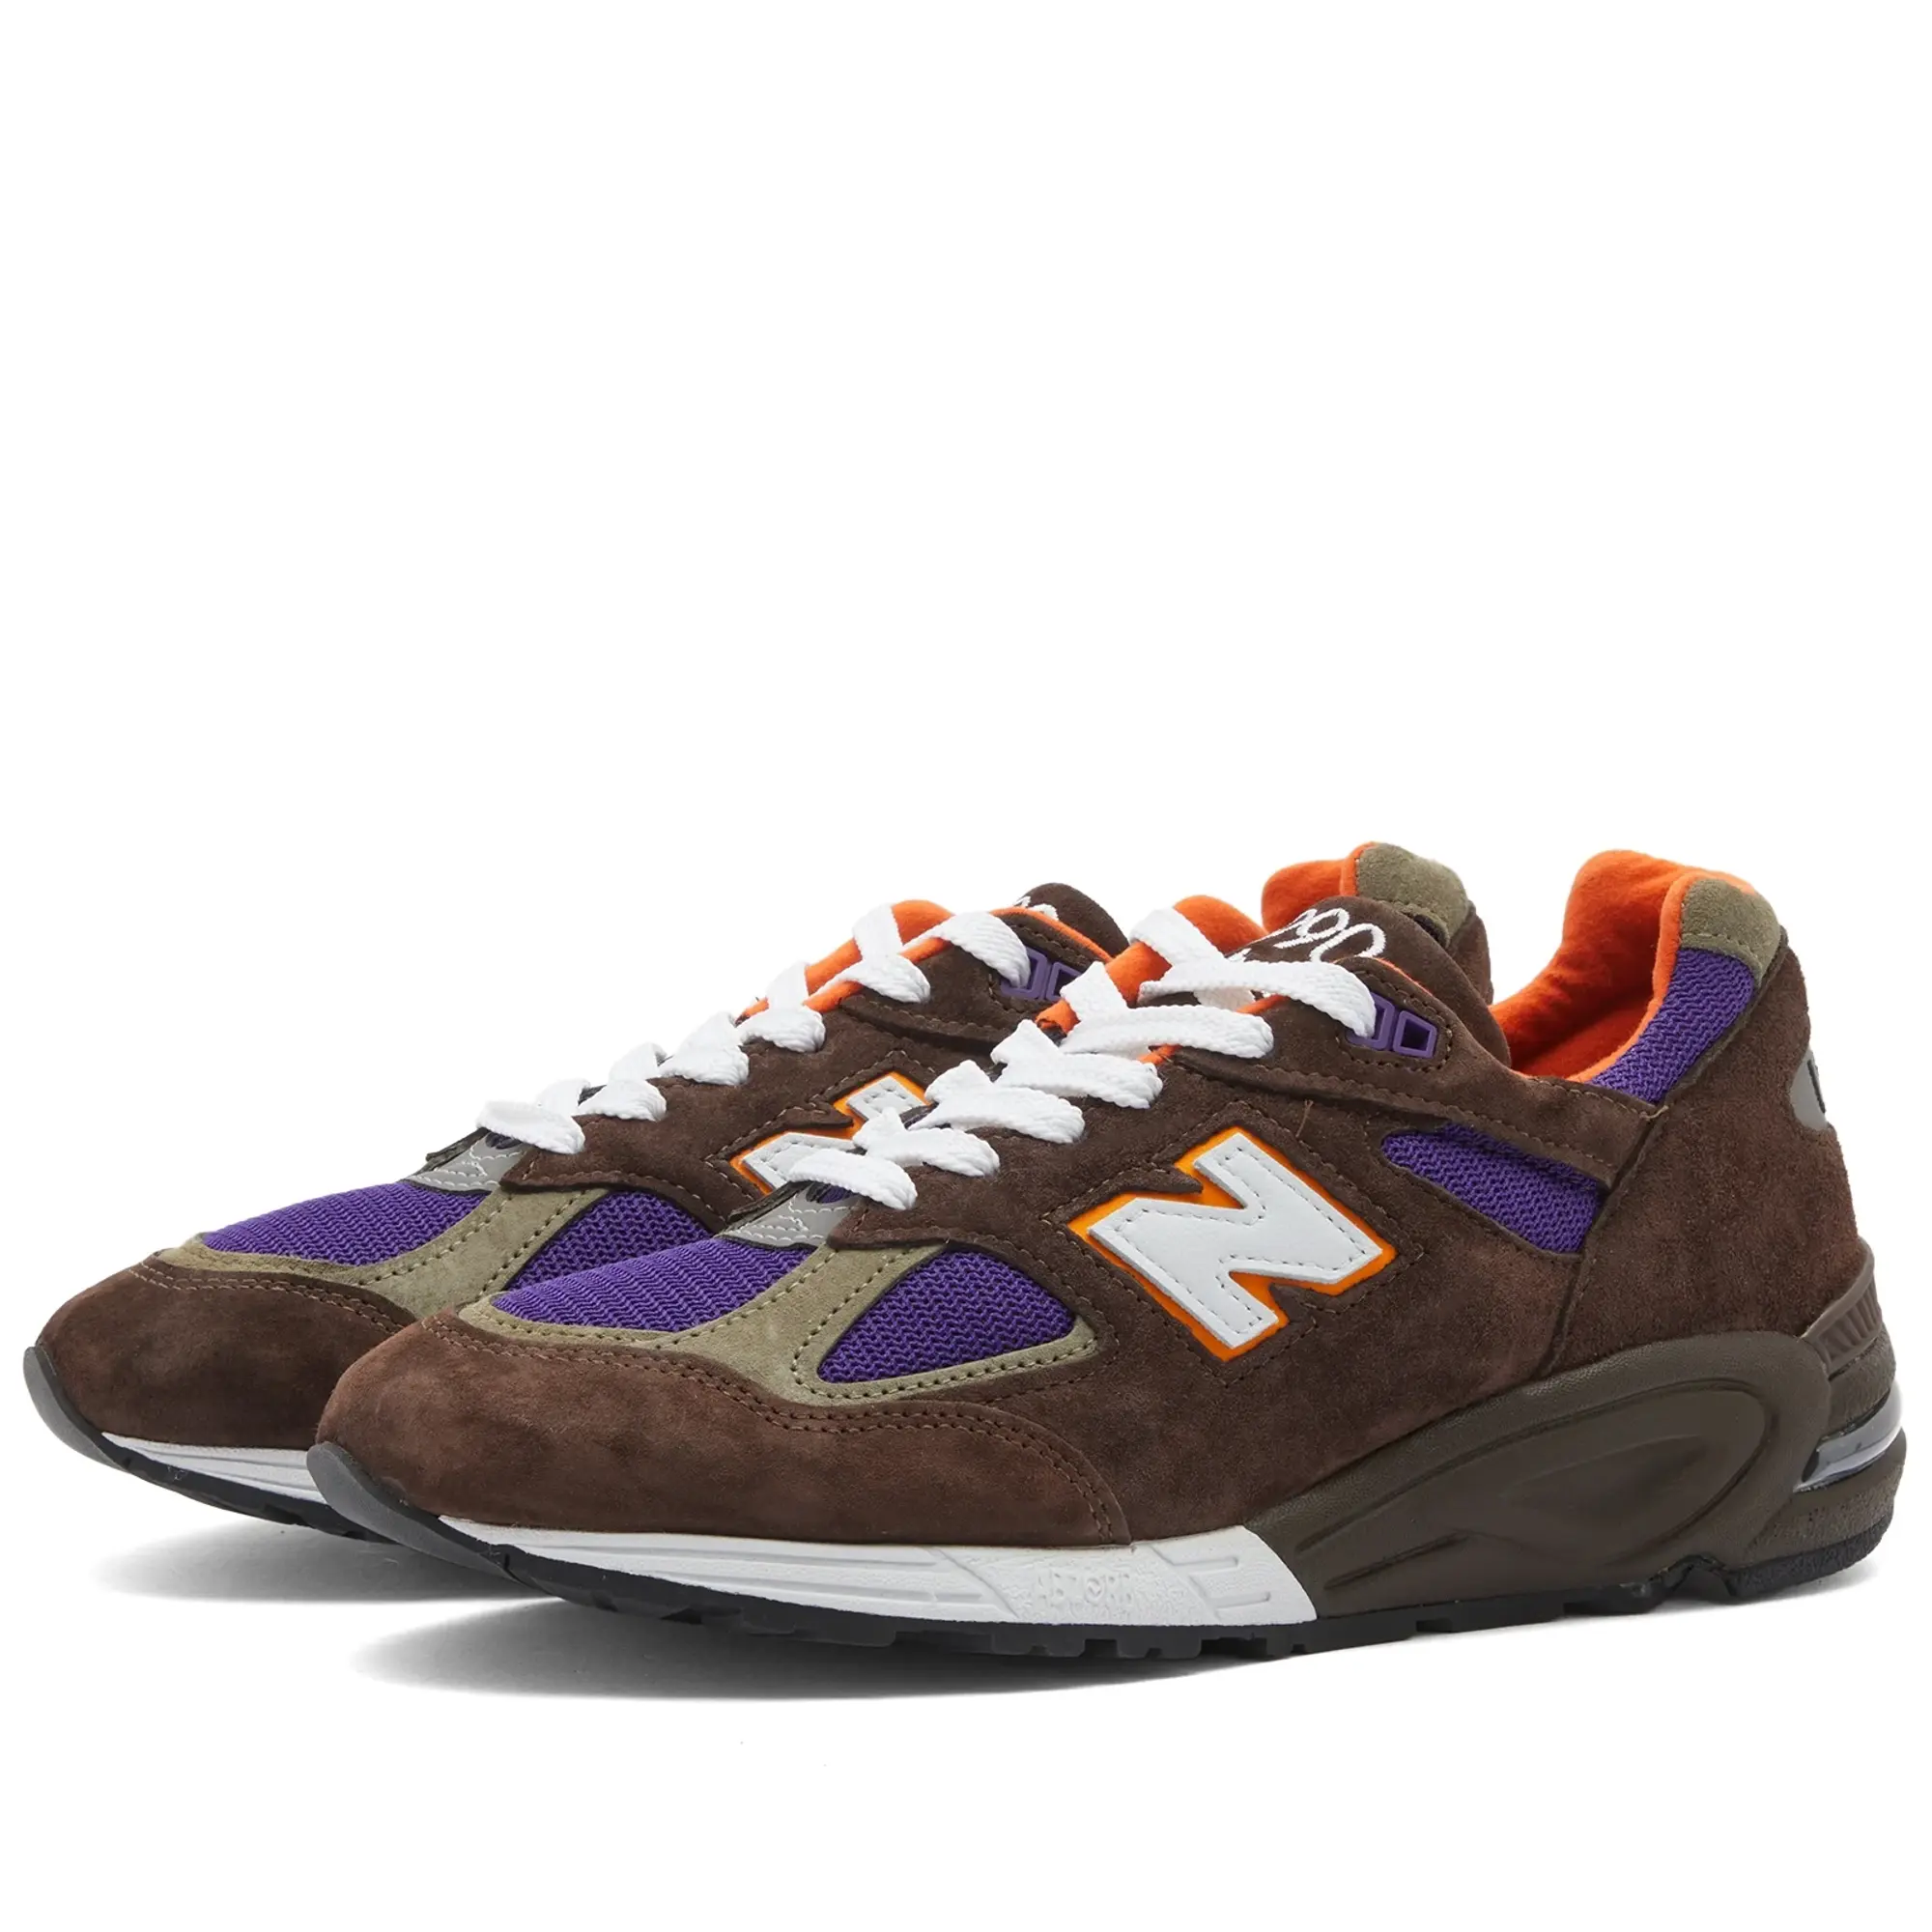 New Balance 990v2 Brown Purple - Made in USA US 10 | M990BR2